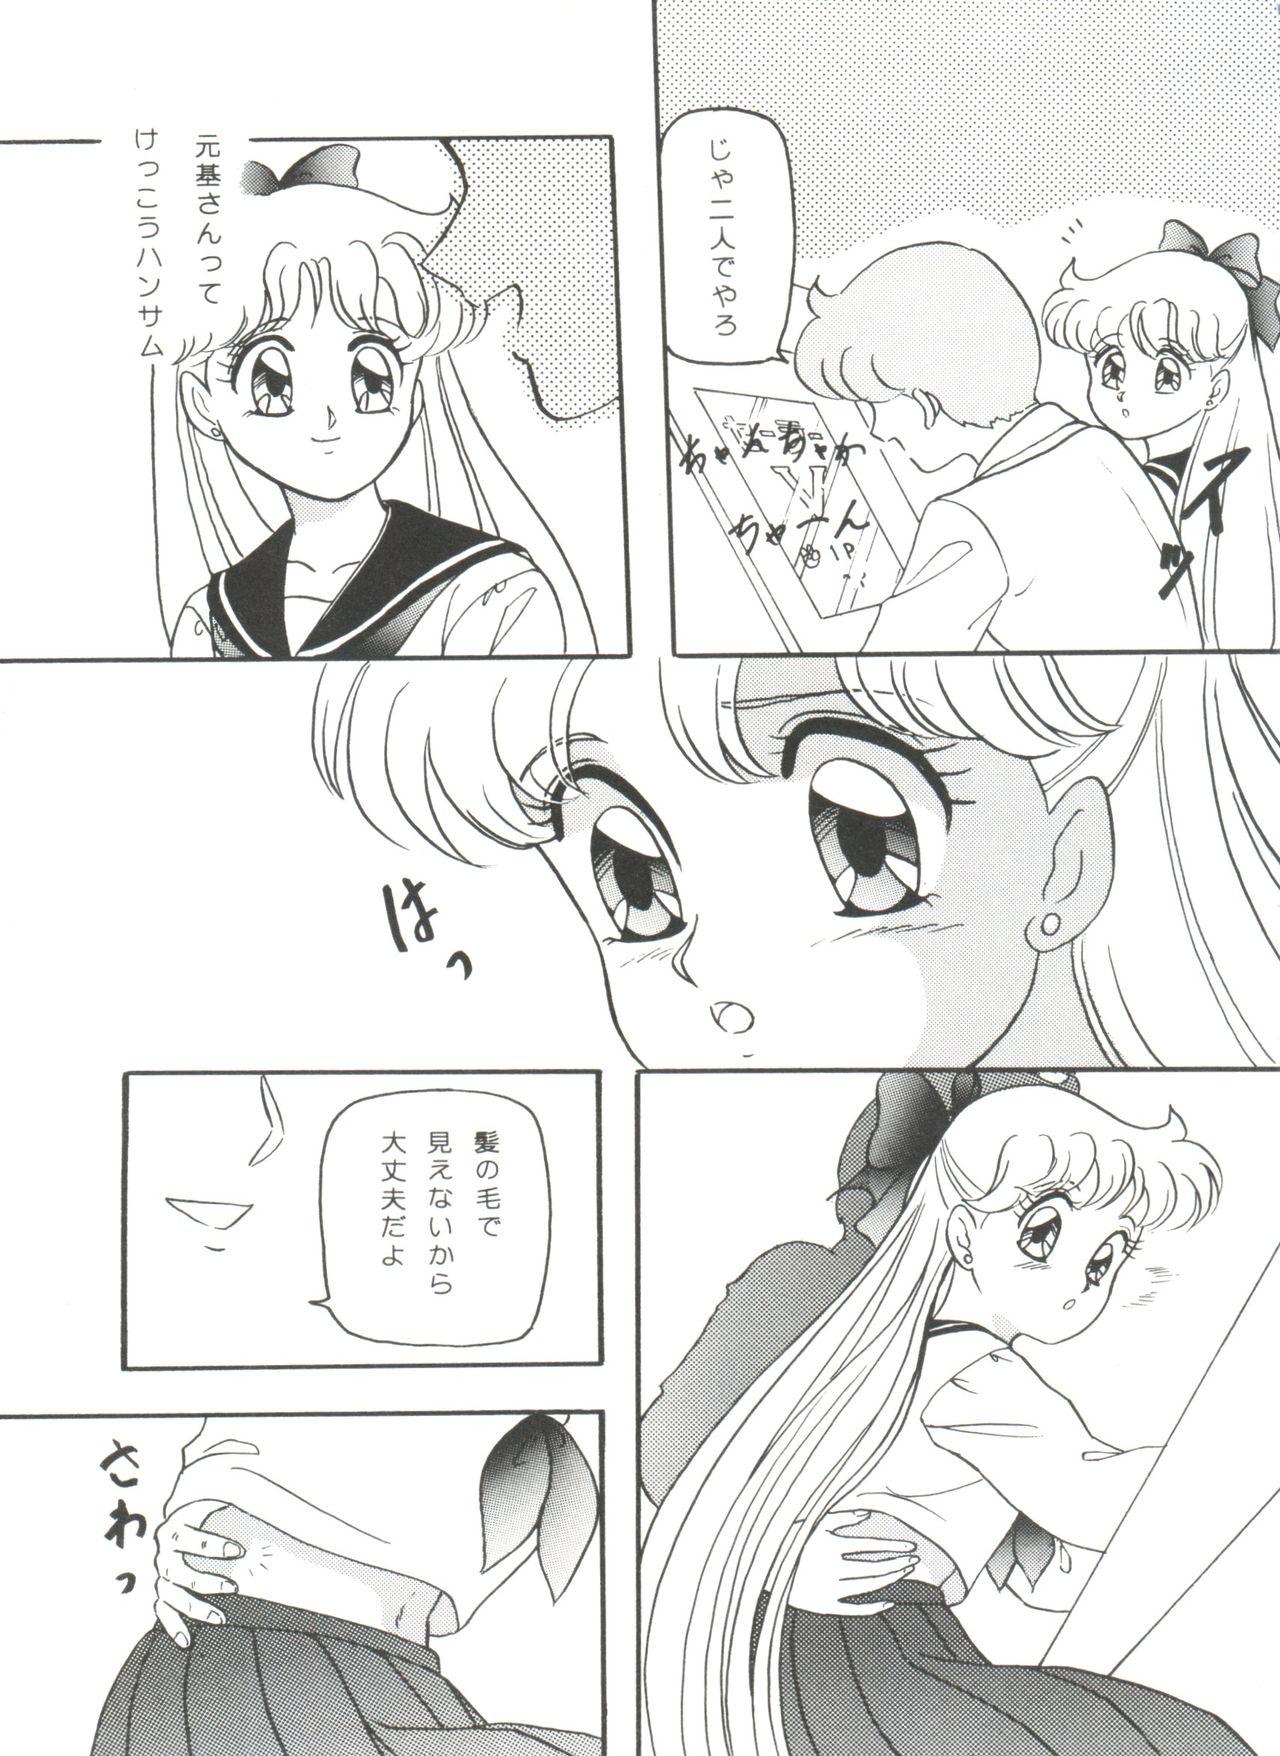 Classic From the Moon - Sailor moon Perfect Ass - Page 7